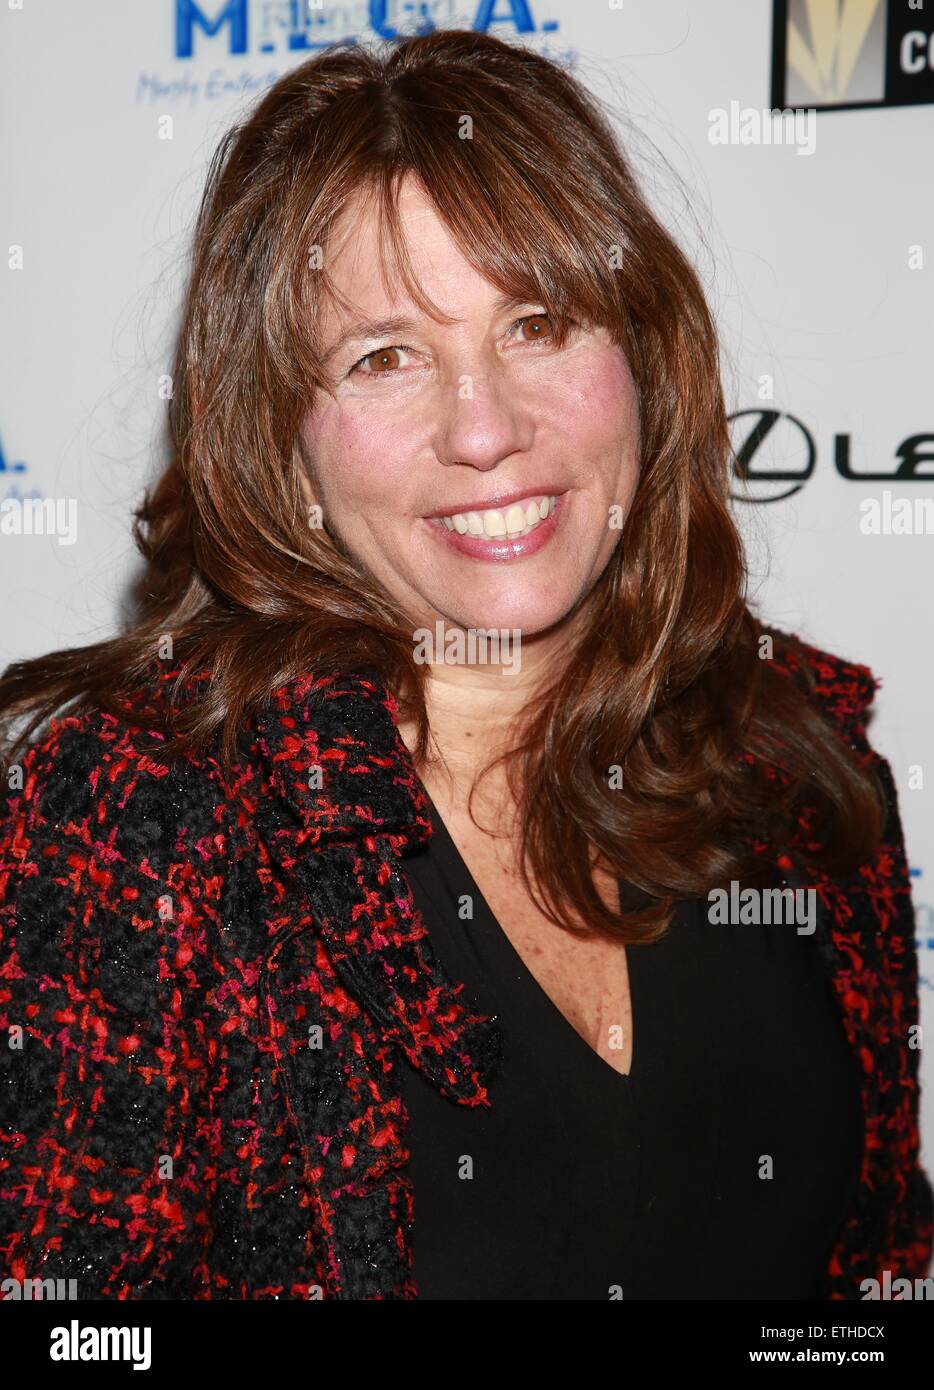 New York premiere party of 'Cop Show' at Caroline's On Broadway Comedy Club - Arrivals  Featuring: Robin Bronk Where: New York, New York, United States When: 23 Feb 2015 Credit: Joseph Marzullo/WENN.com Stock Photo